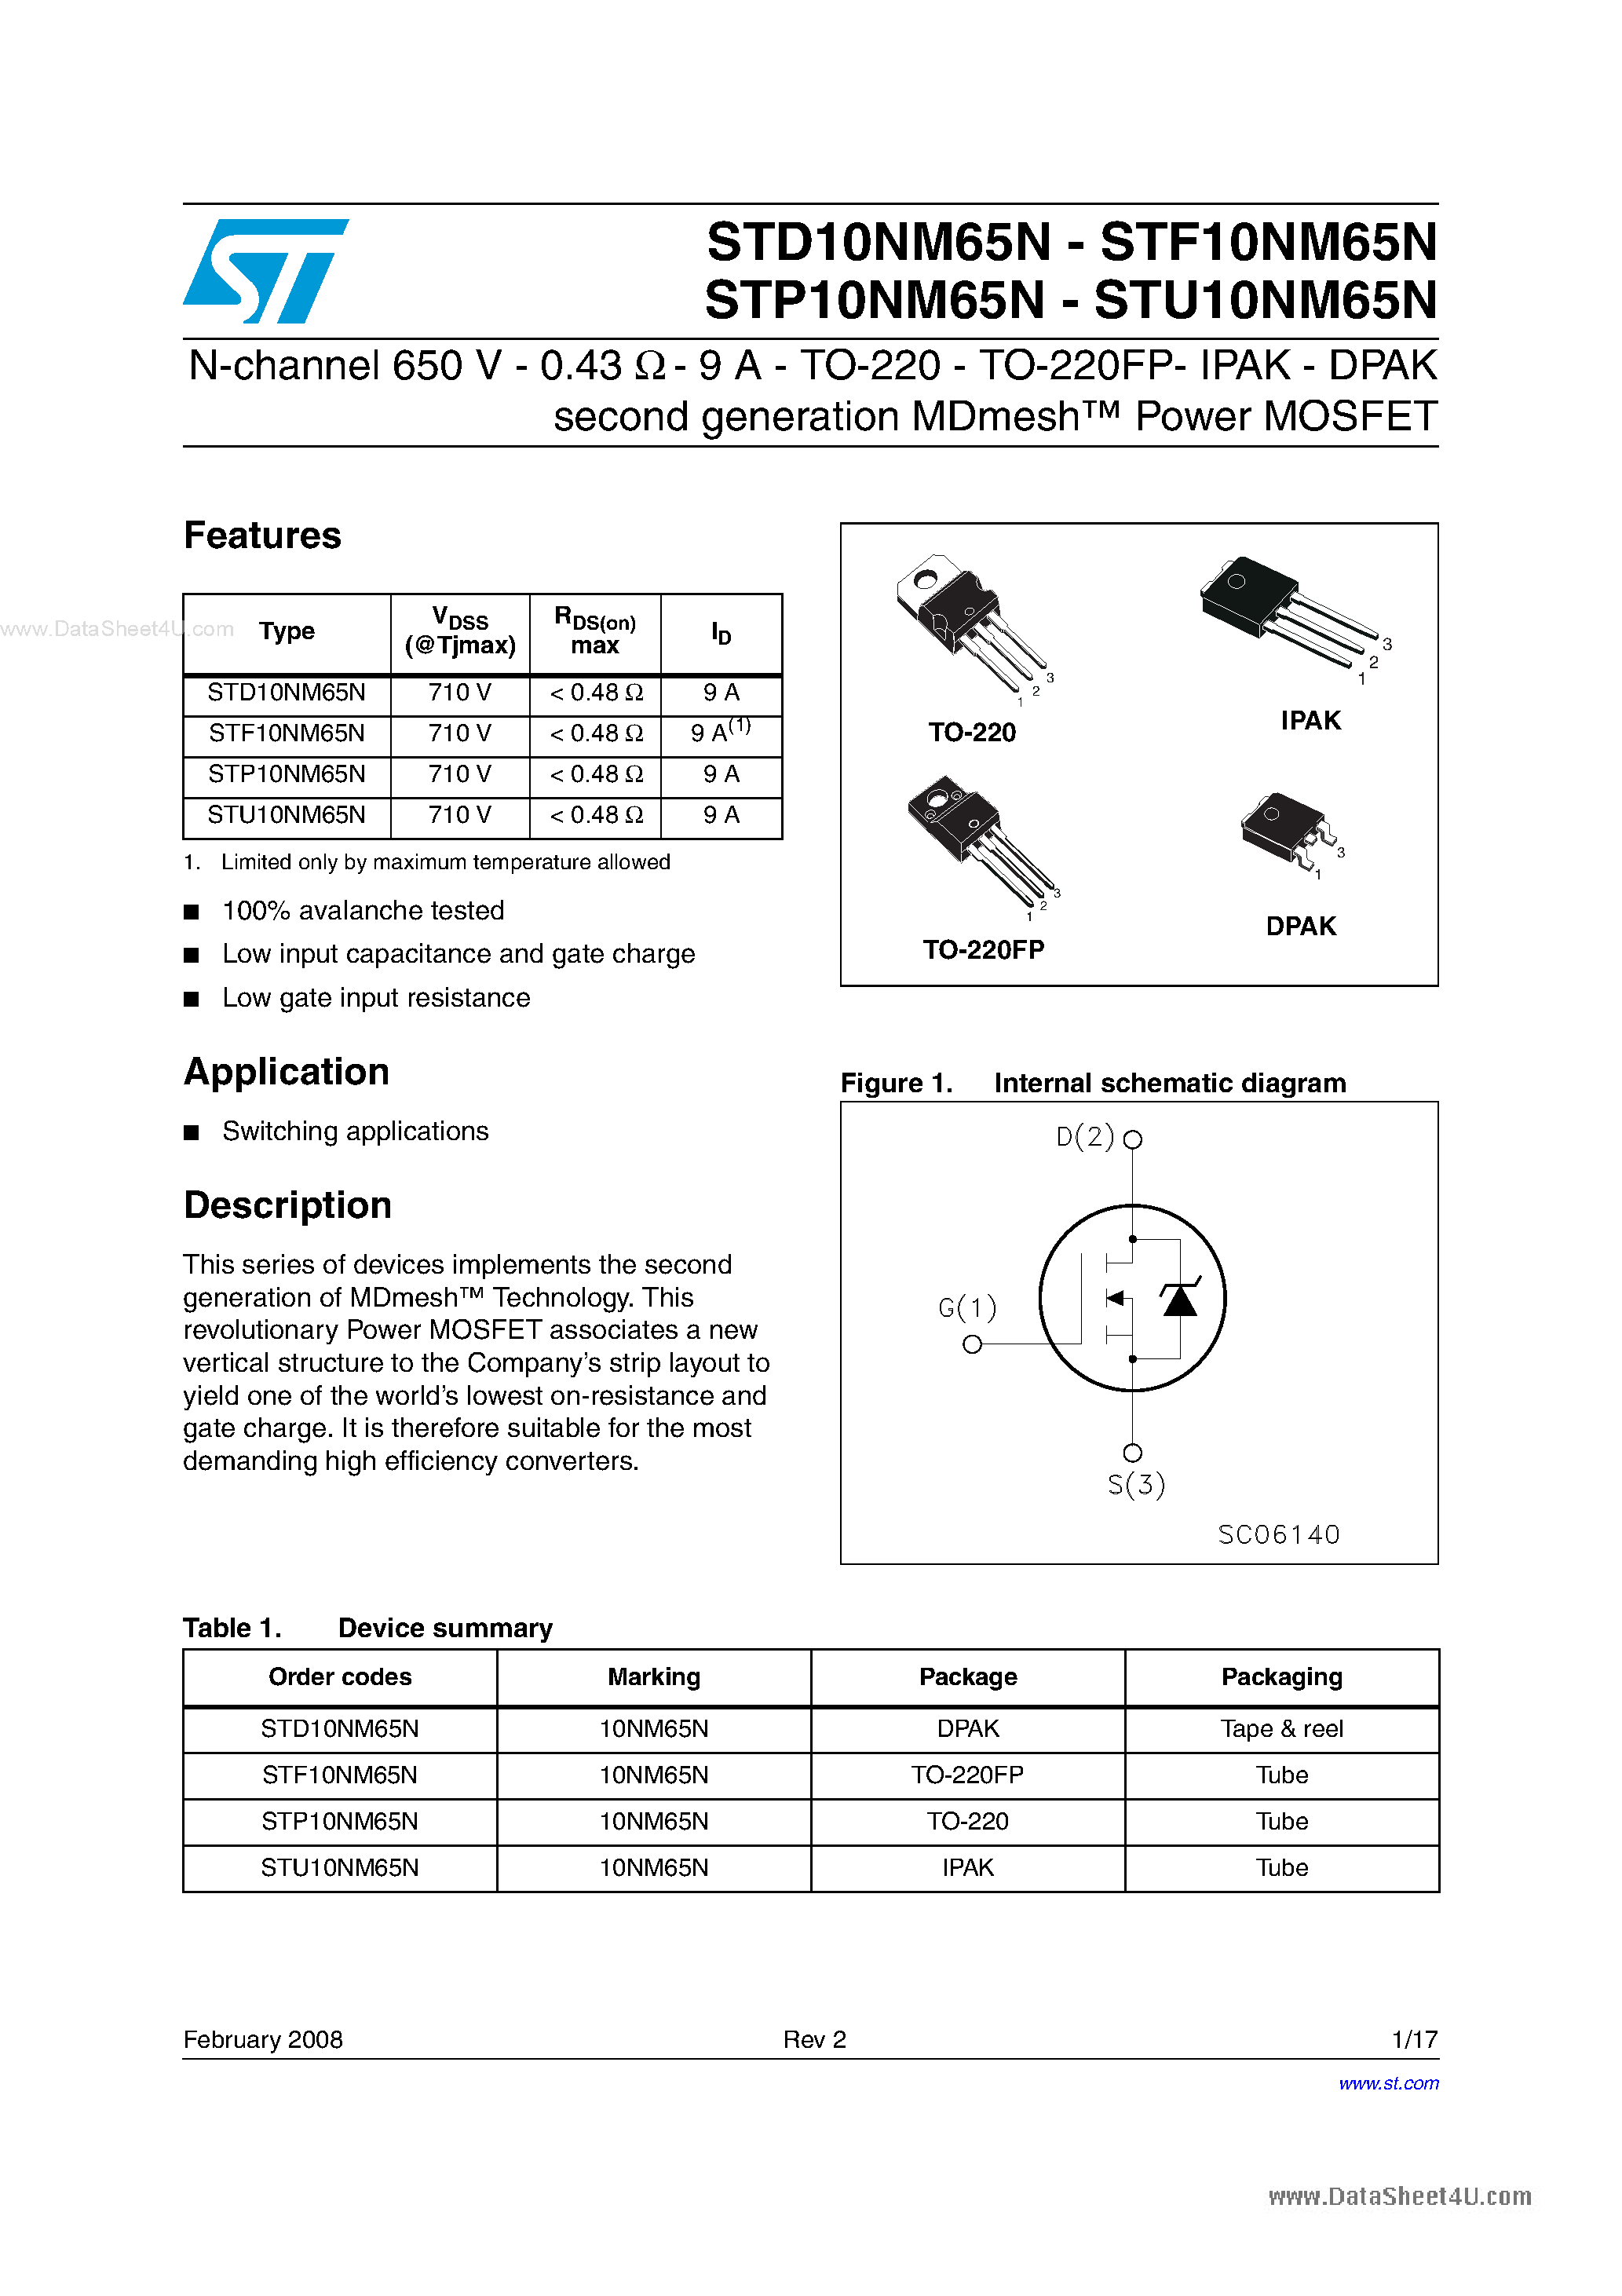 Datasheet STP10NM65N - N-channel Power MOSFET page 1